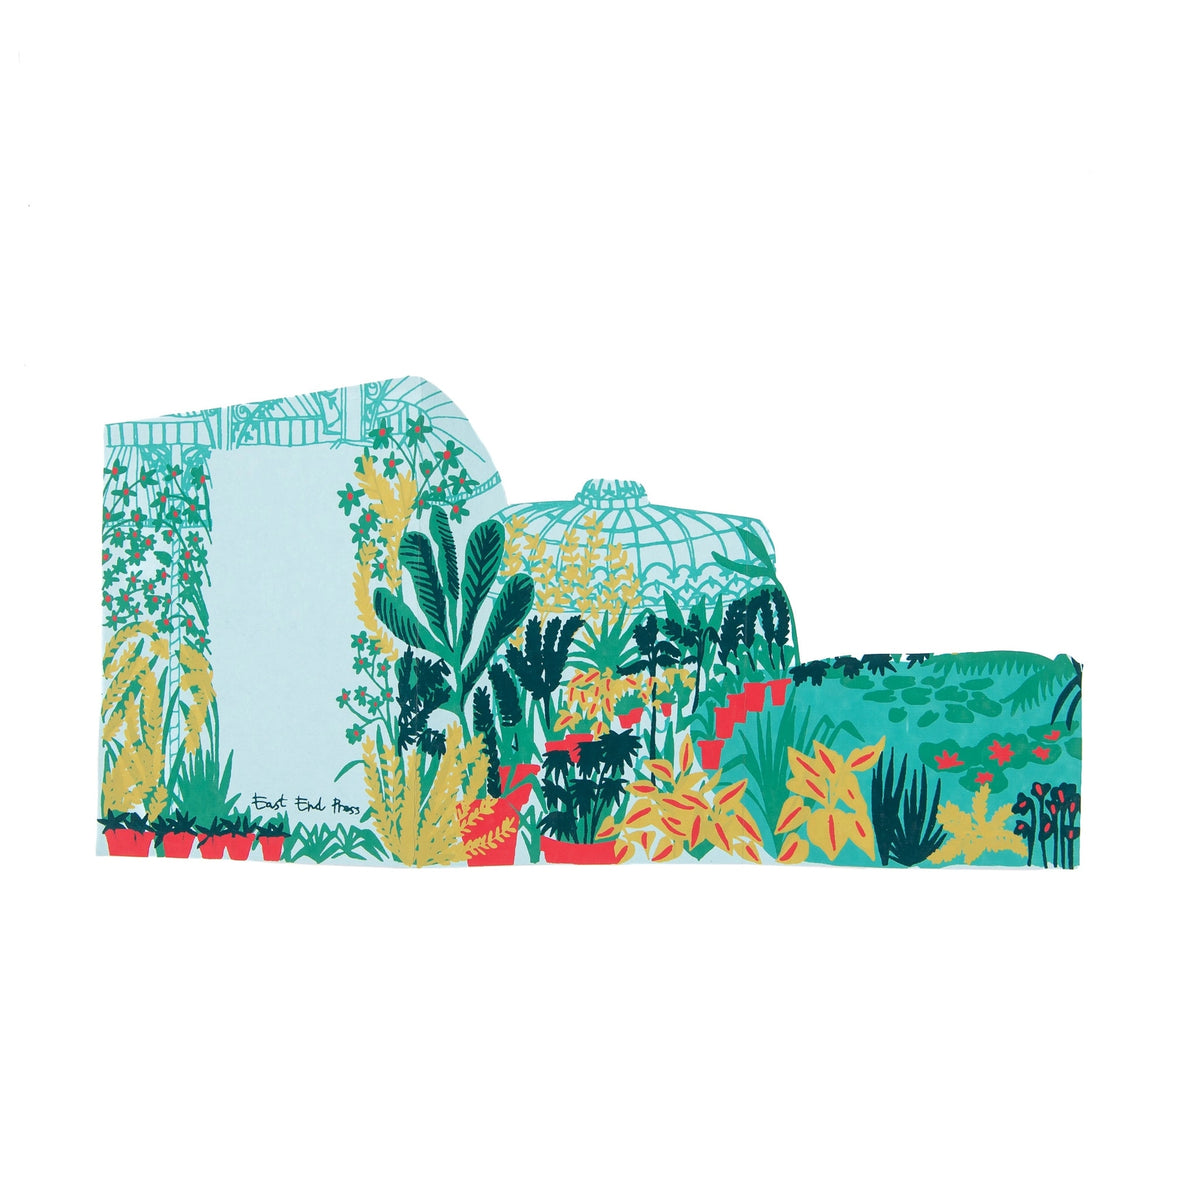 Glass house shaped concertina greetings card covered in screen printed plants and dome imagery. The image shows a blank are where the message could be written.